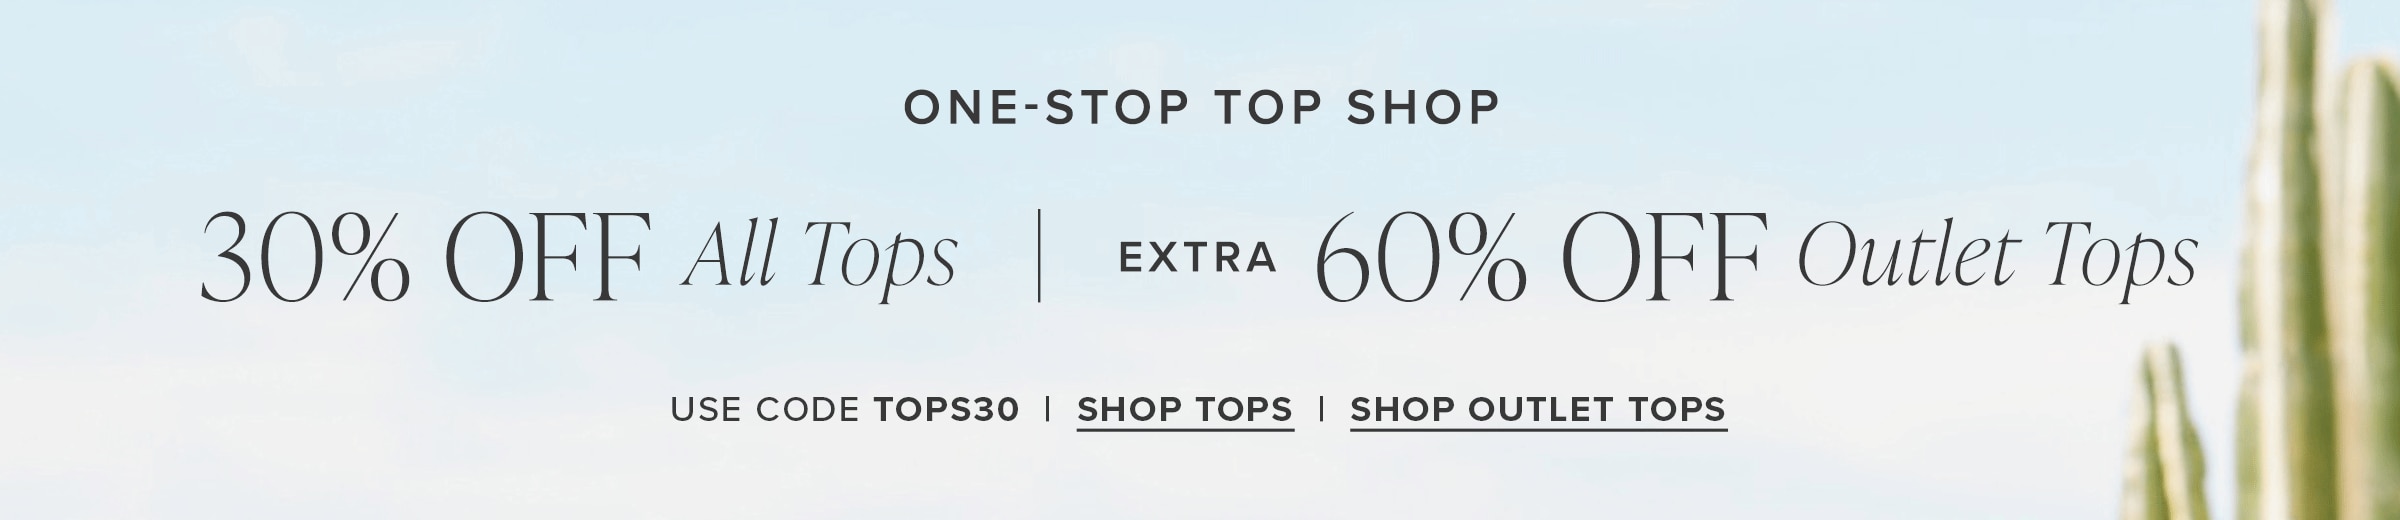 30% Off All Tops + 60% Off Outlet Tops